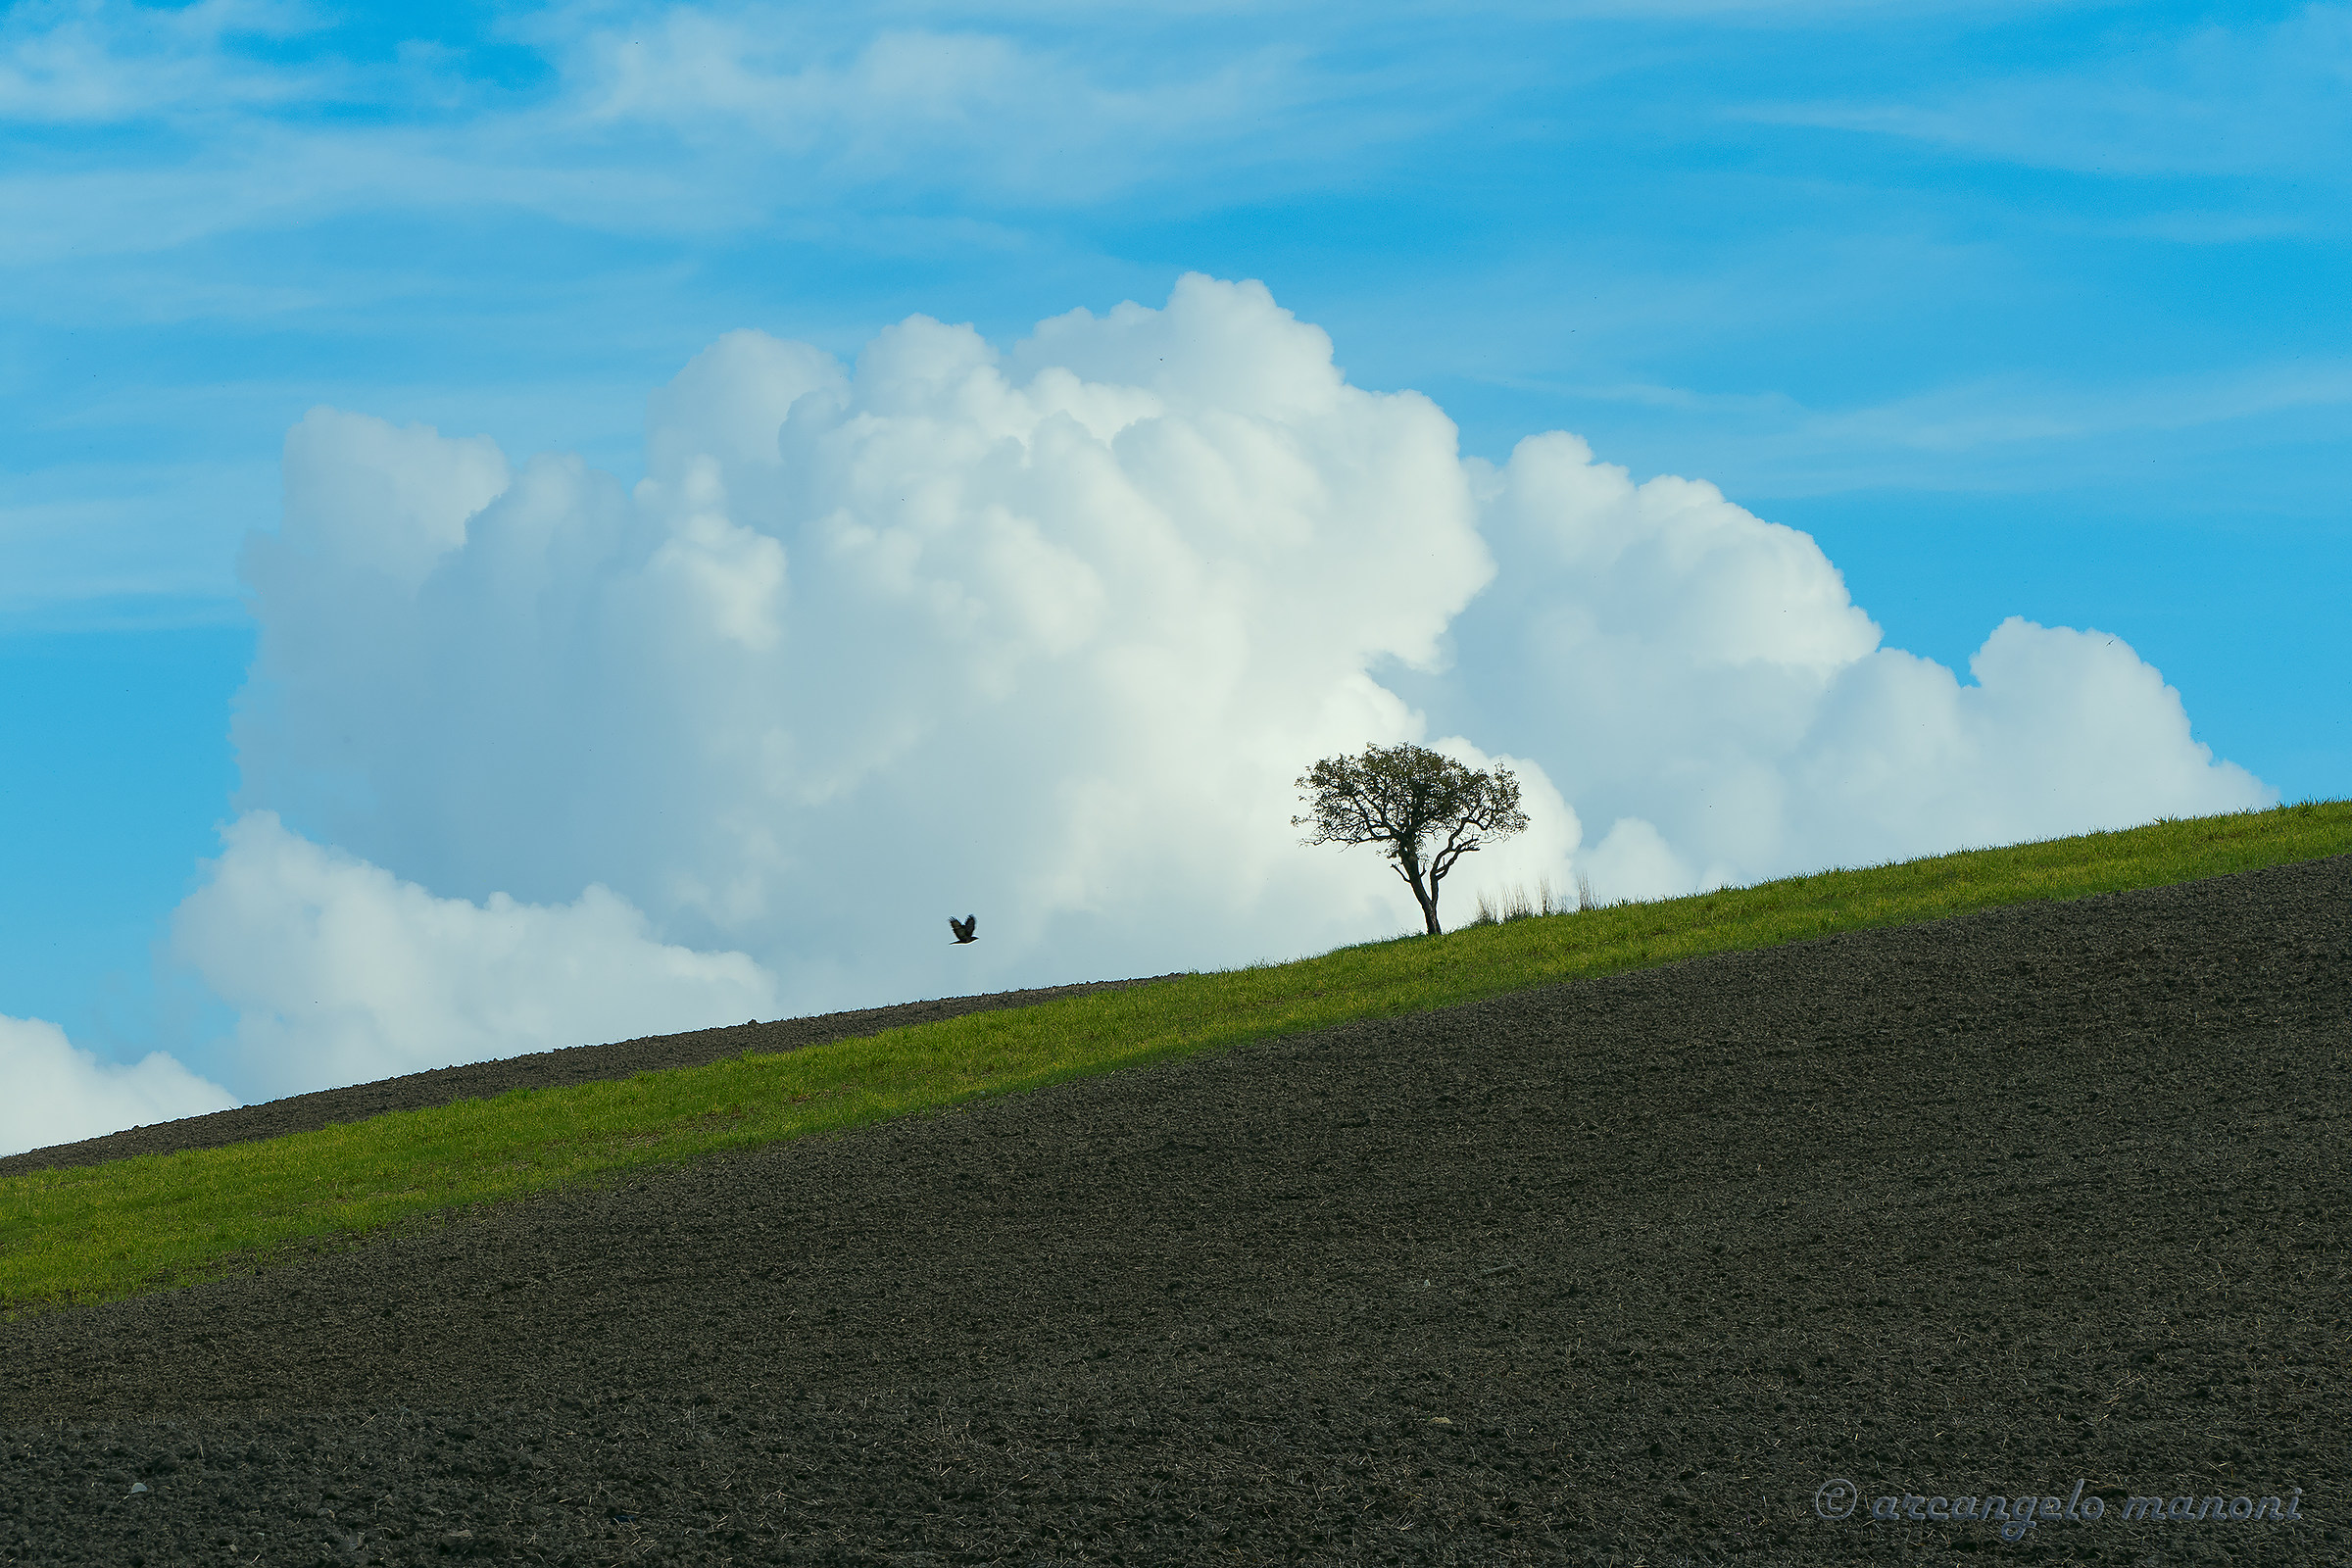 The earth, the tree, the bird, the clouds and the sky...